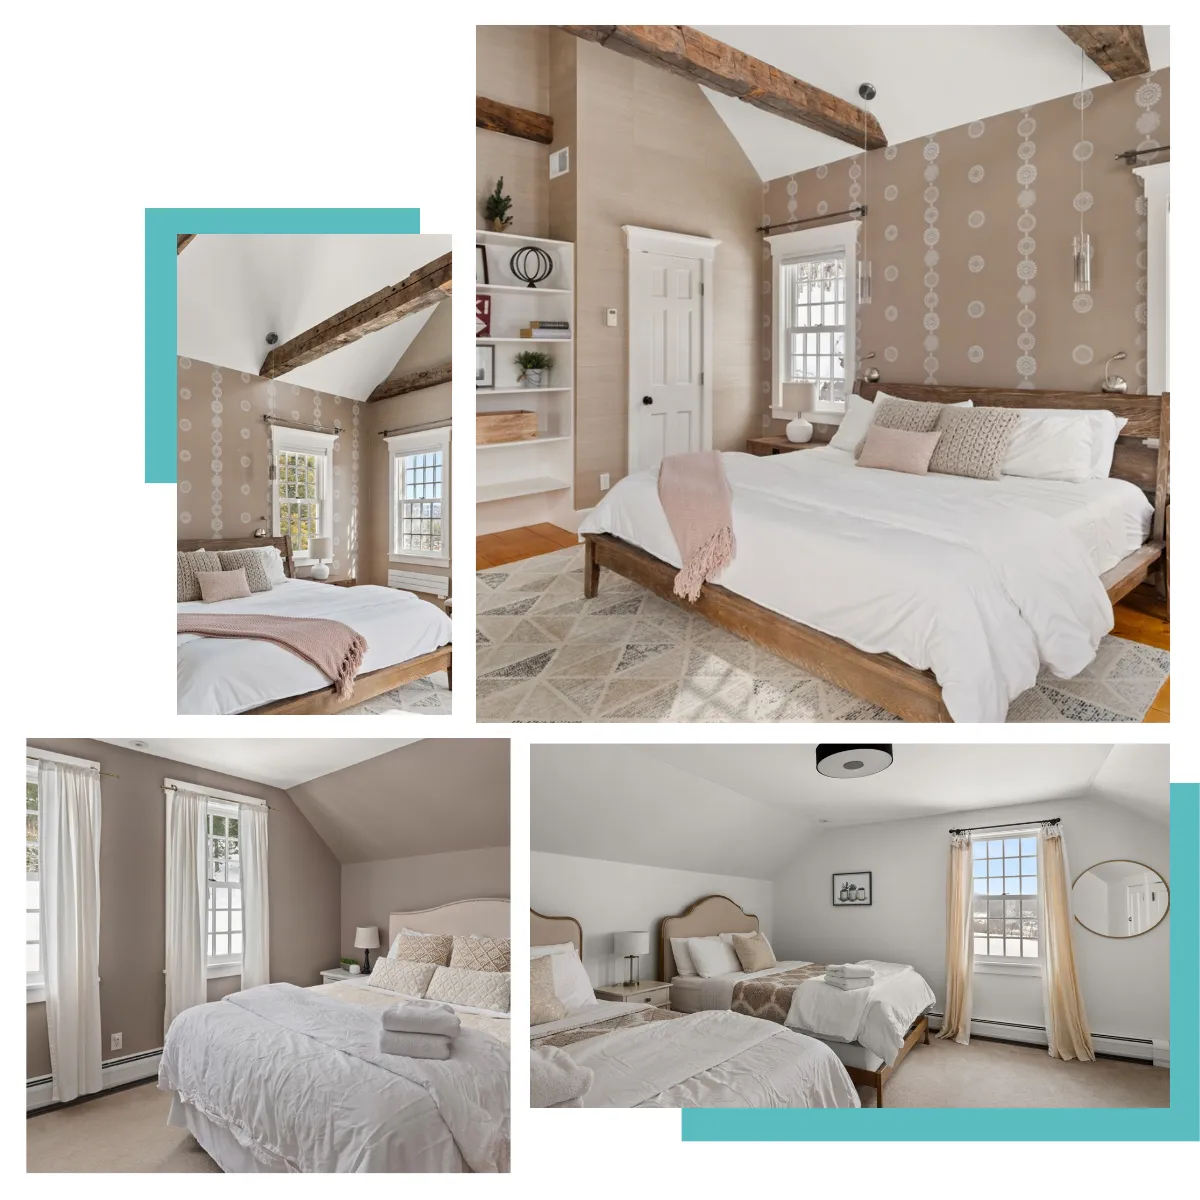 Sleeping Arrangements - Bedrooms and Restful Spaces at Modern Farmhouse